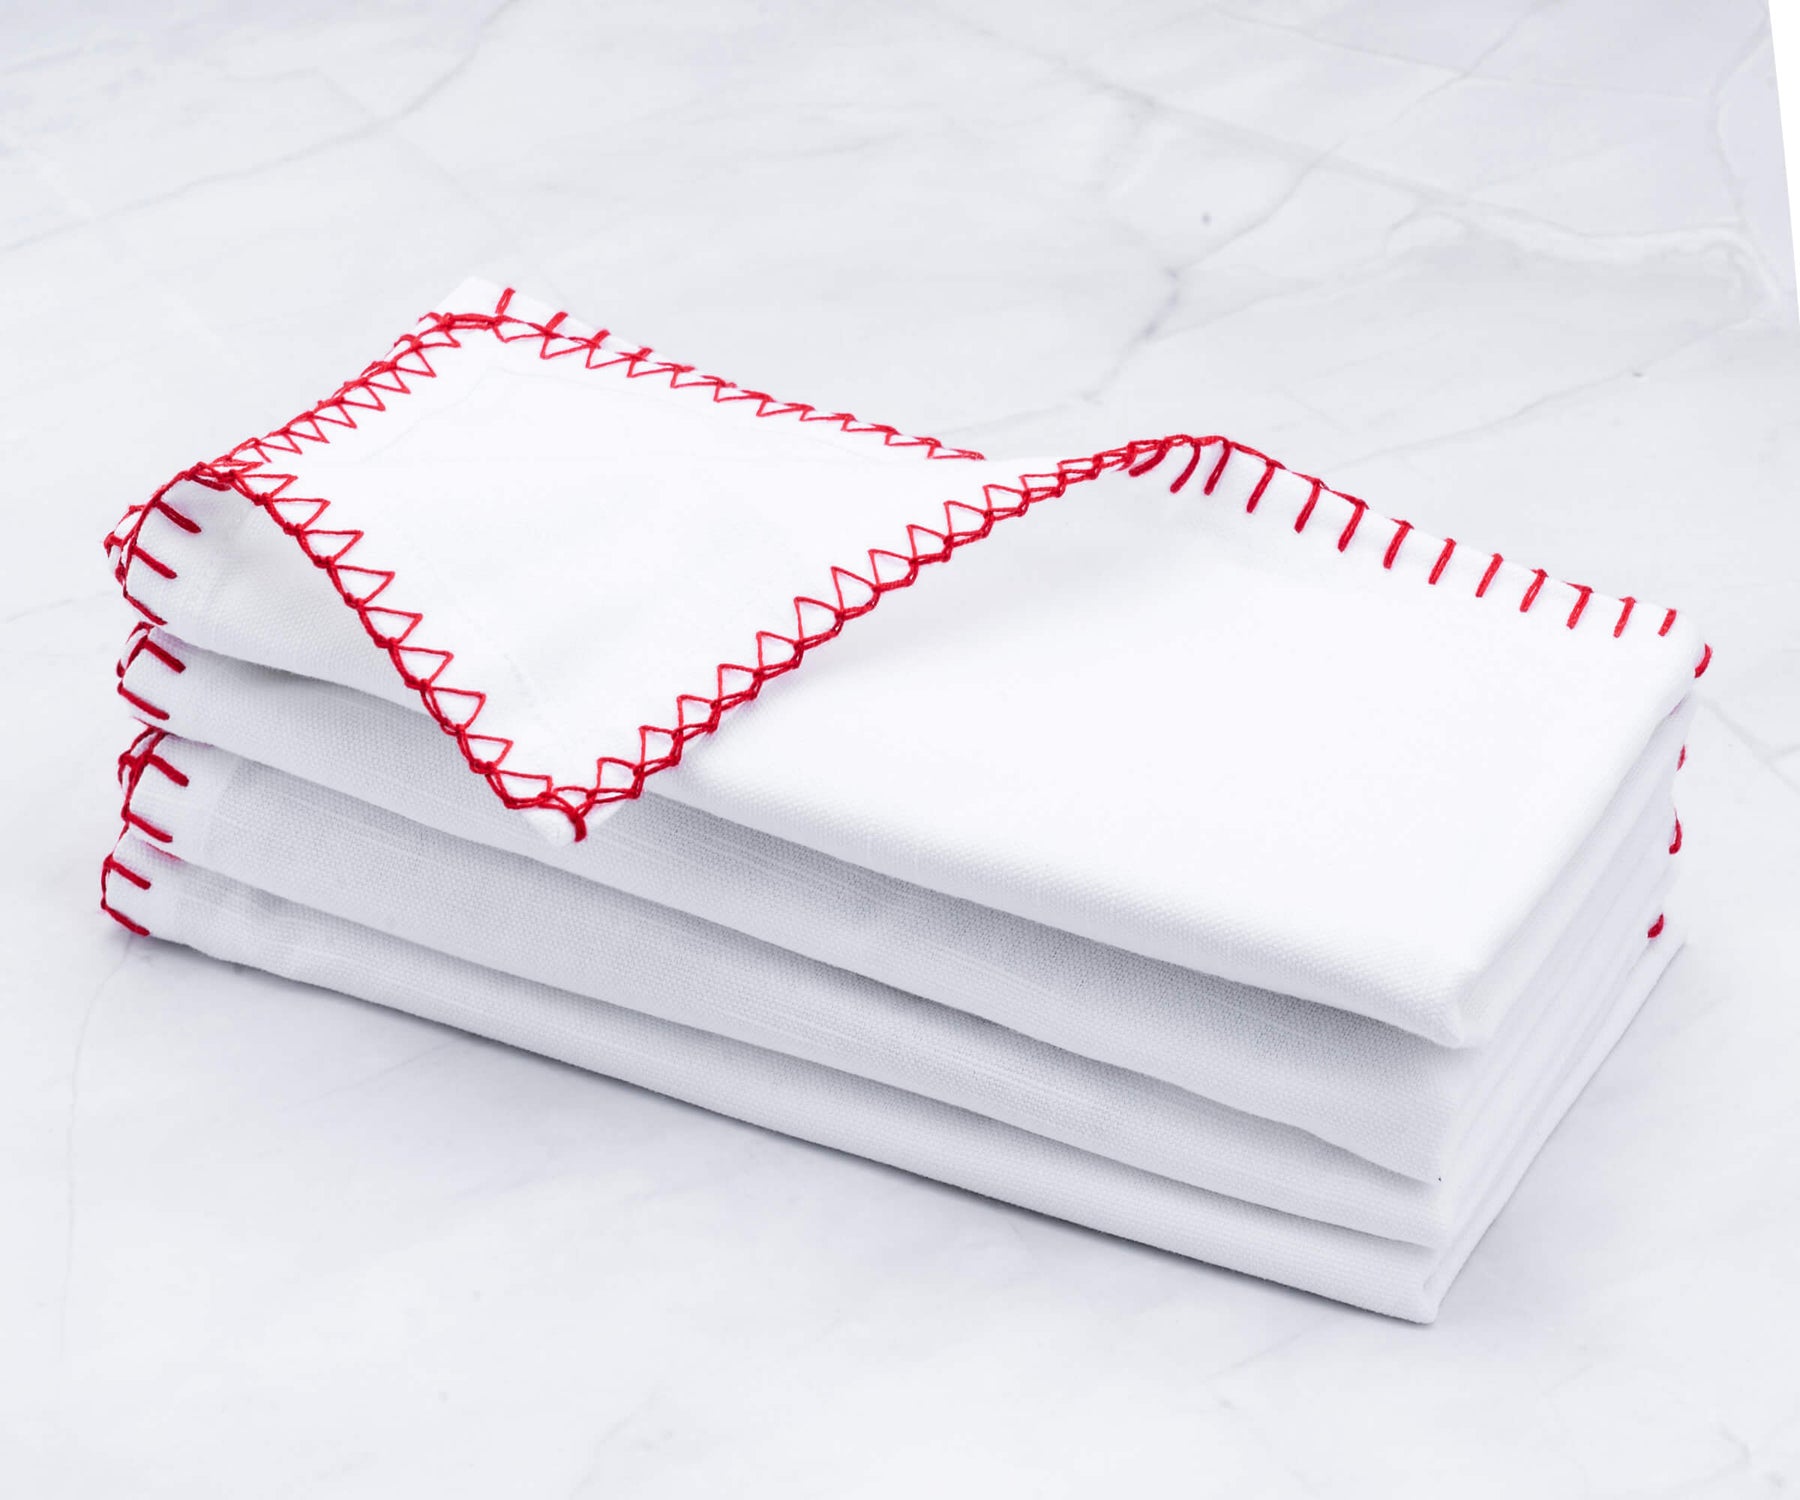 Neat stack of shell edge napkins with vibrant red embroidery